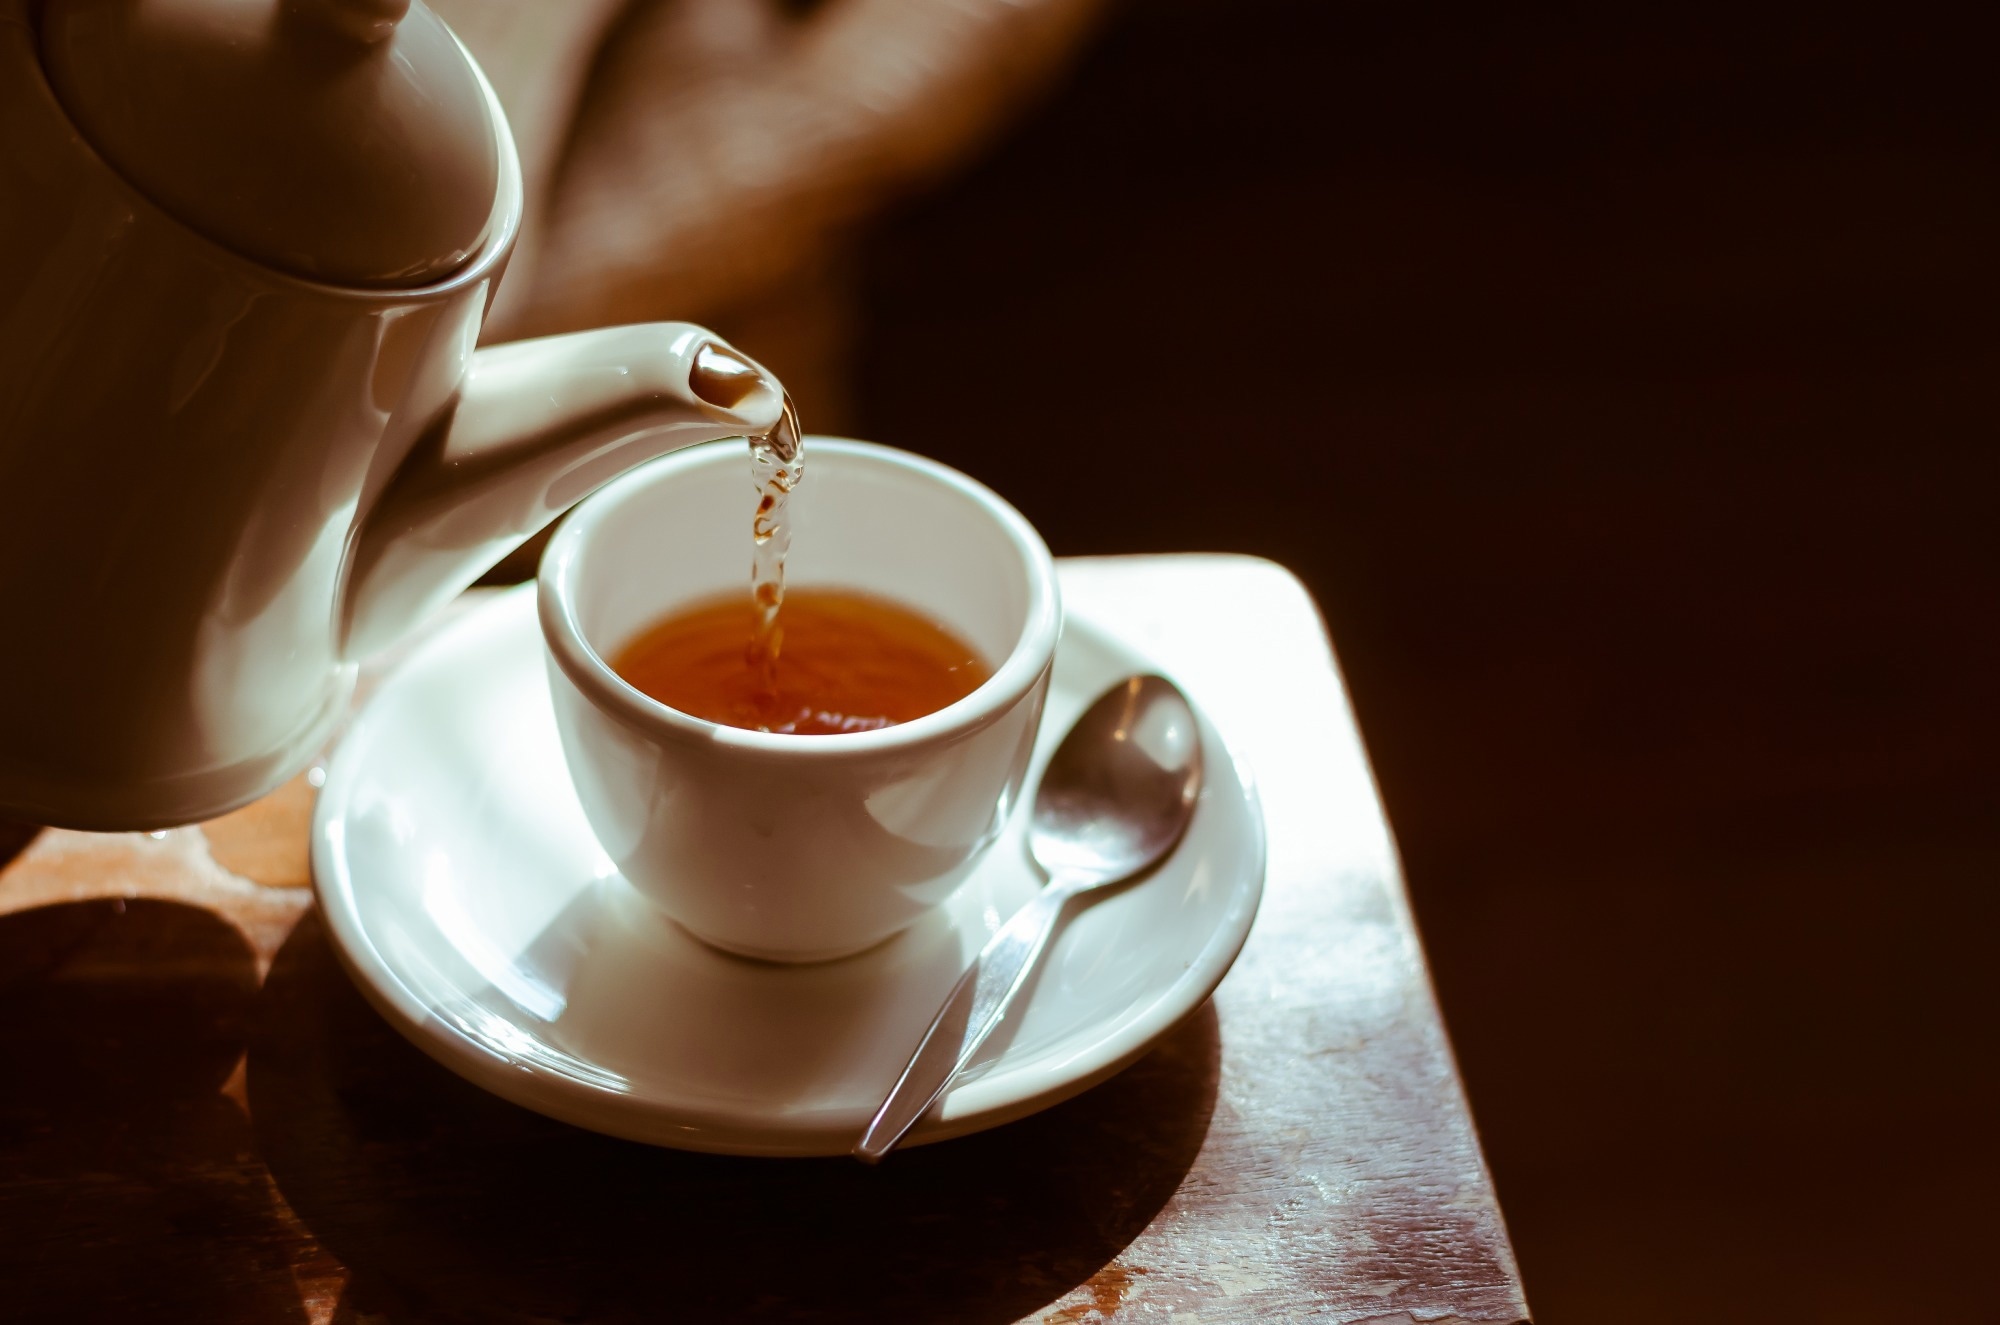 Study: Alcohol intake masked the protective effects of tea consumption against all-cause mortality and blood pressure progression: Findings from CHNS cohort, 1993–2011. Image Credit: iroKlyngz/Shutterstock.com